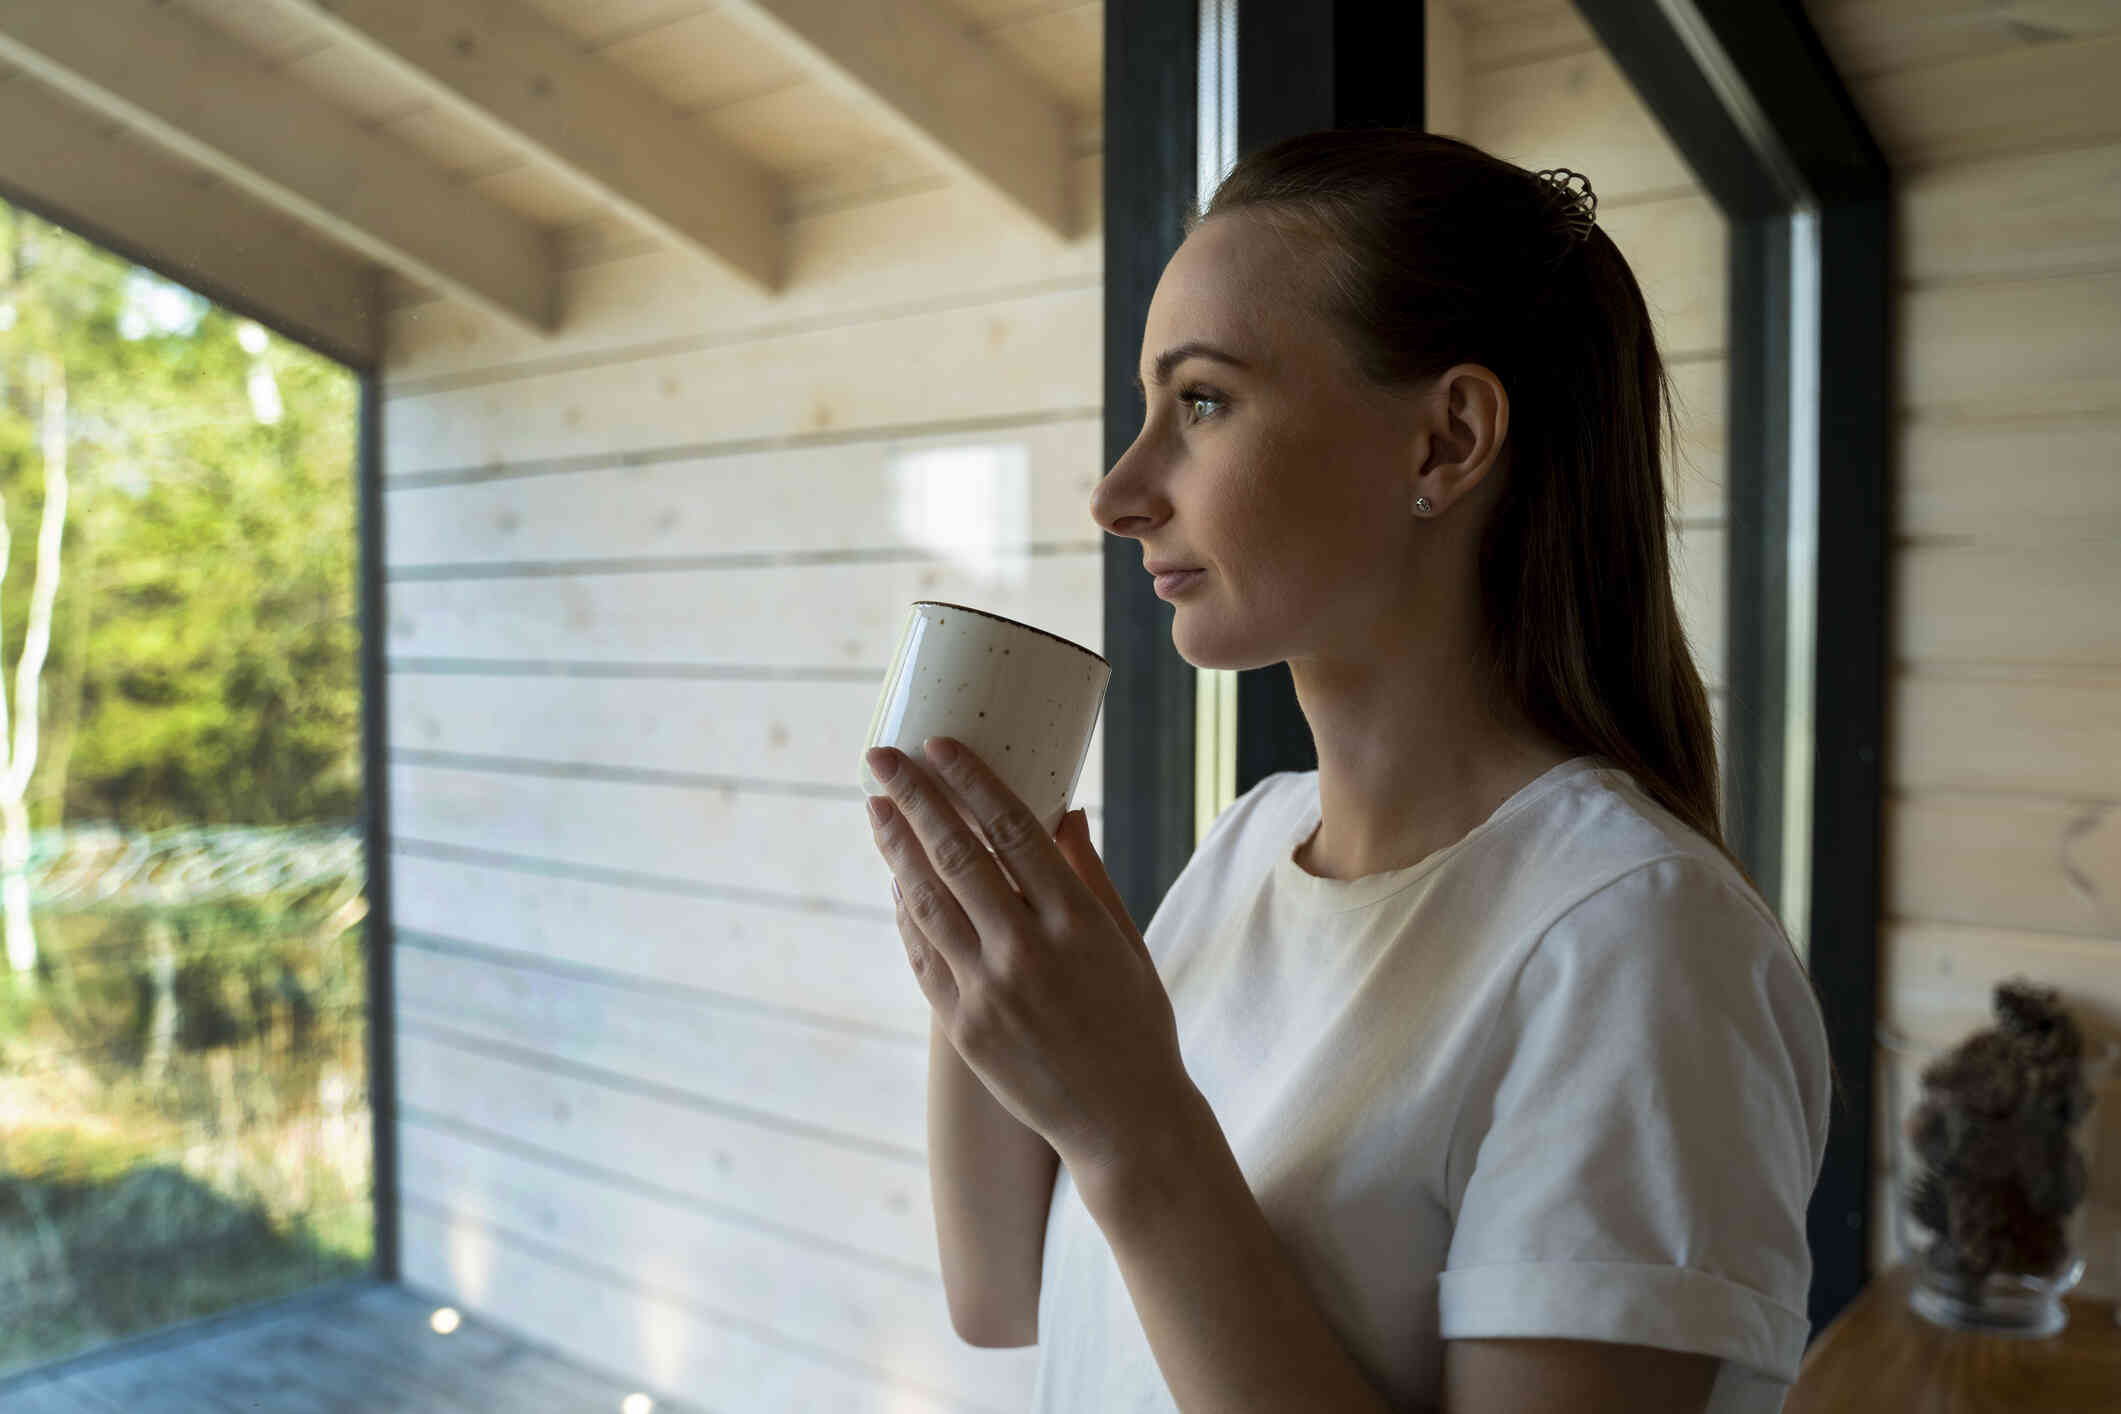 A woman in a white shirts colds a coffee mug close to her face  as she gazes out of a window in her home while deep in thought.